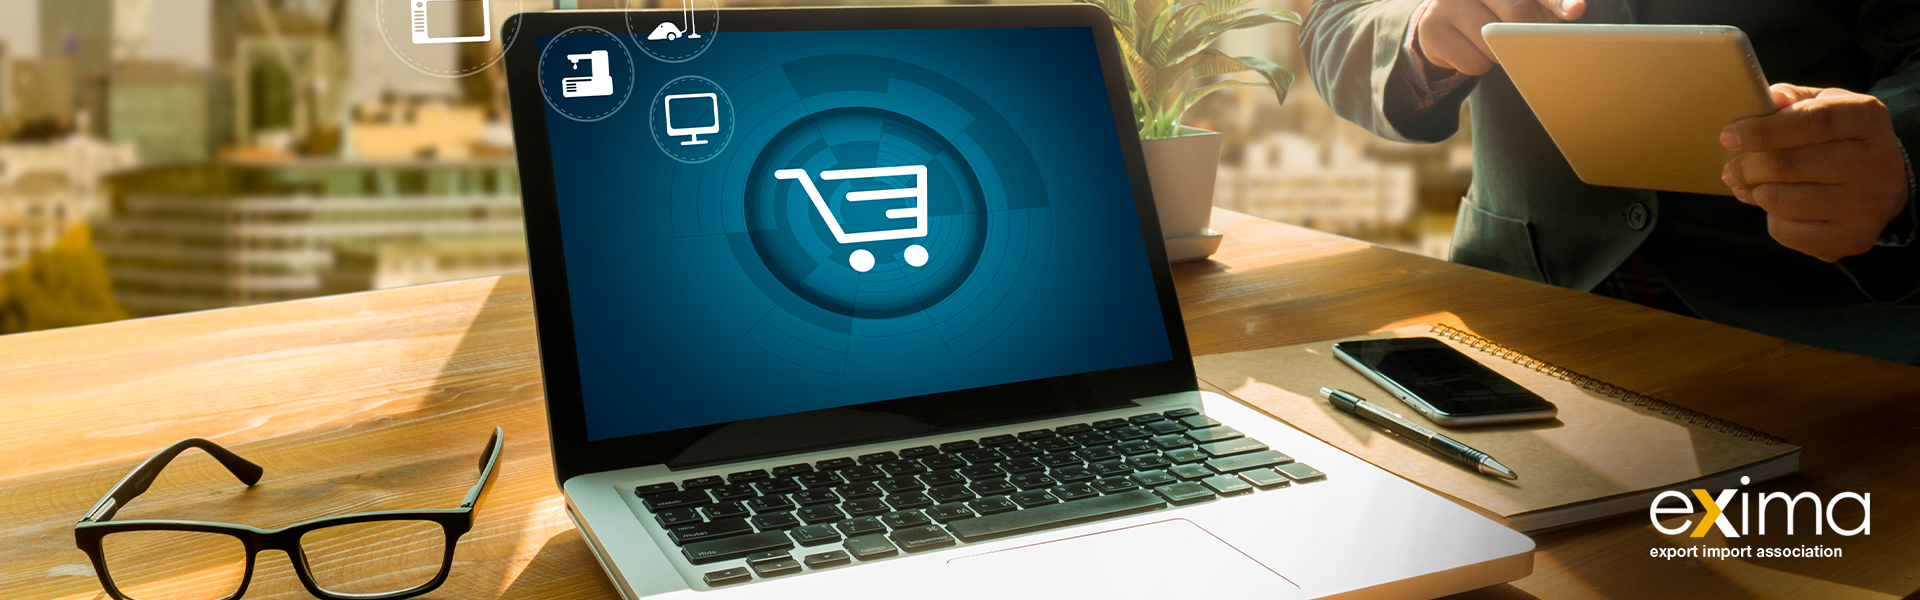 Tips for starting your own eCommerce business | Read More on...